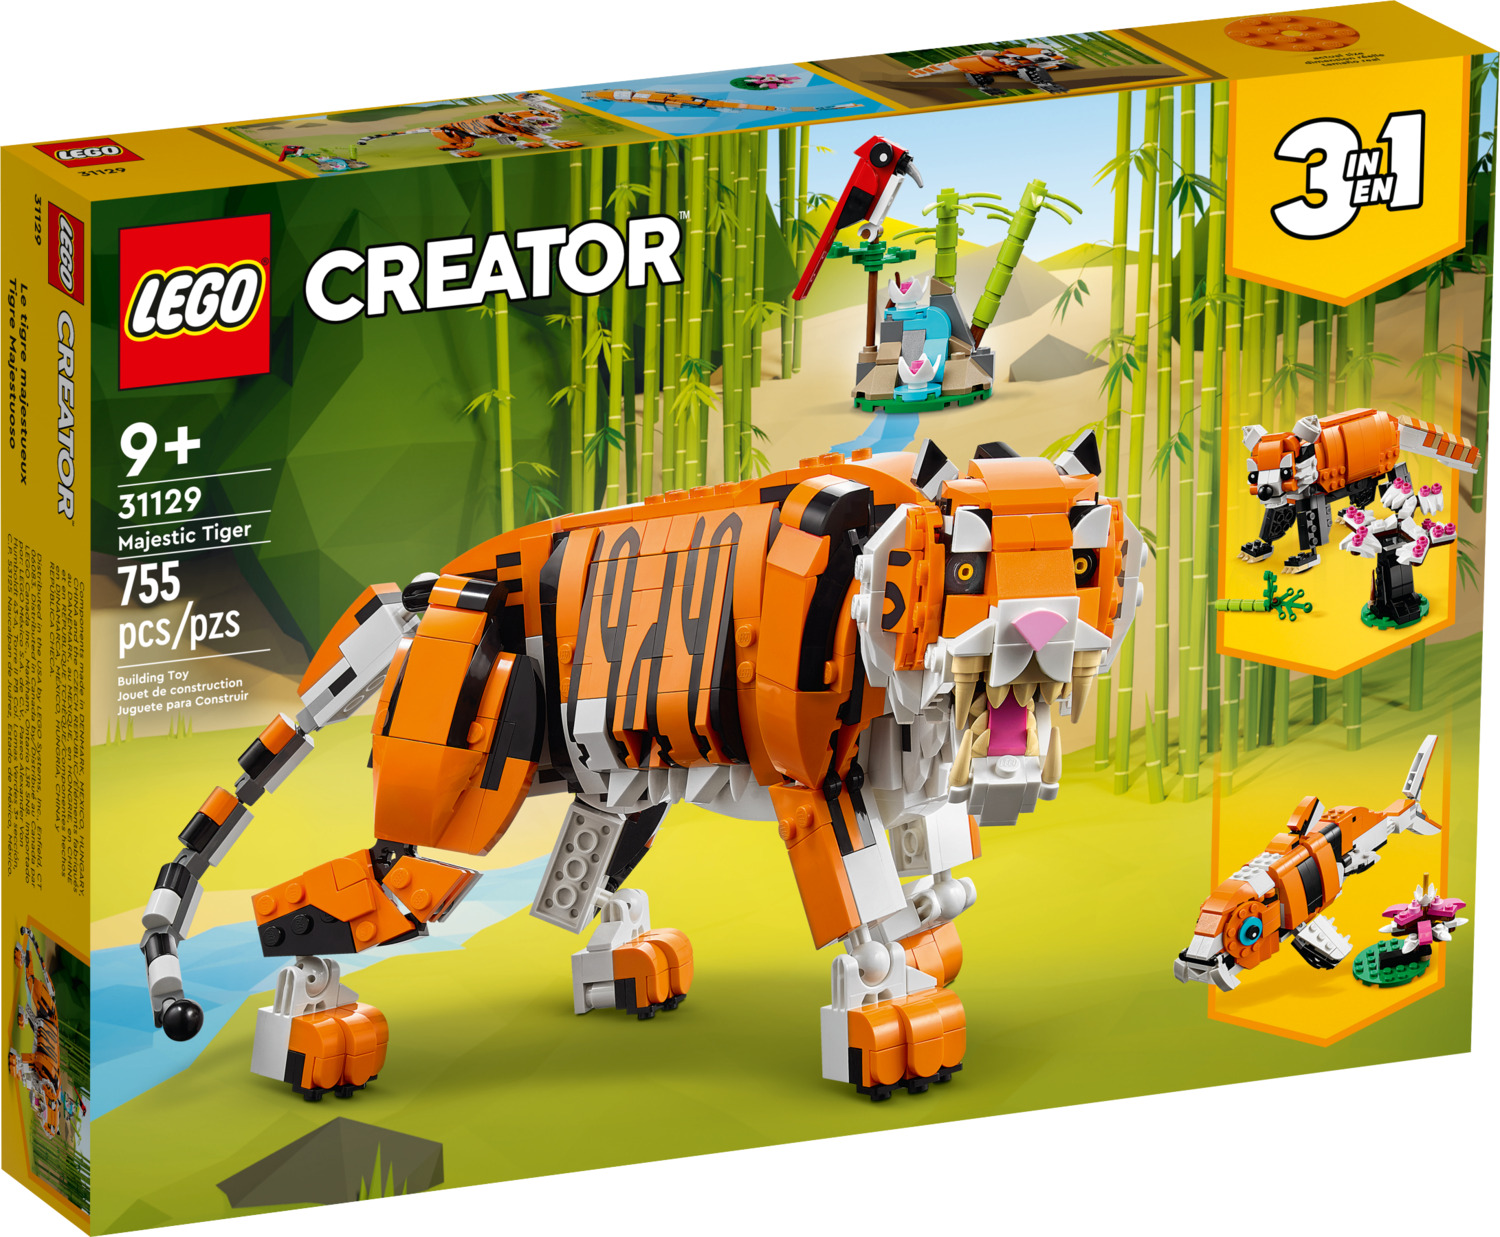 LEGO Creator 3-in-1: Majestic Tiger - Givens Books and Little Dickens